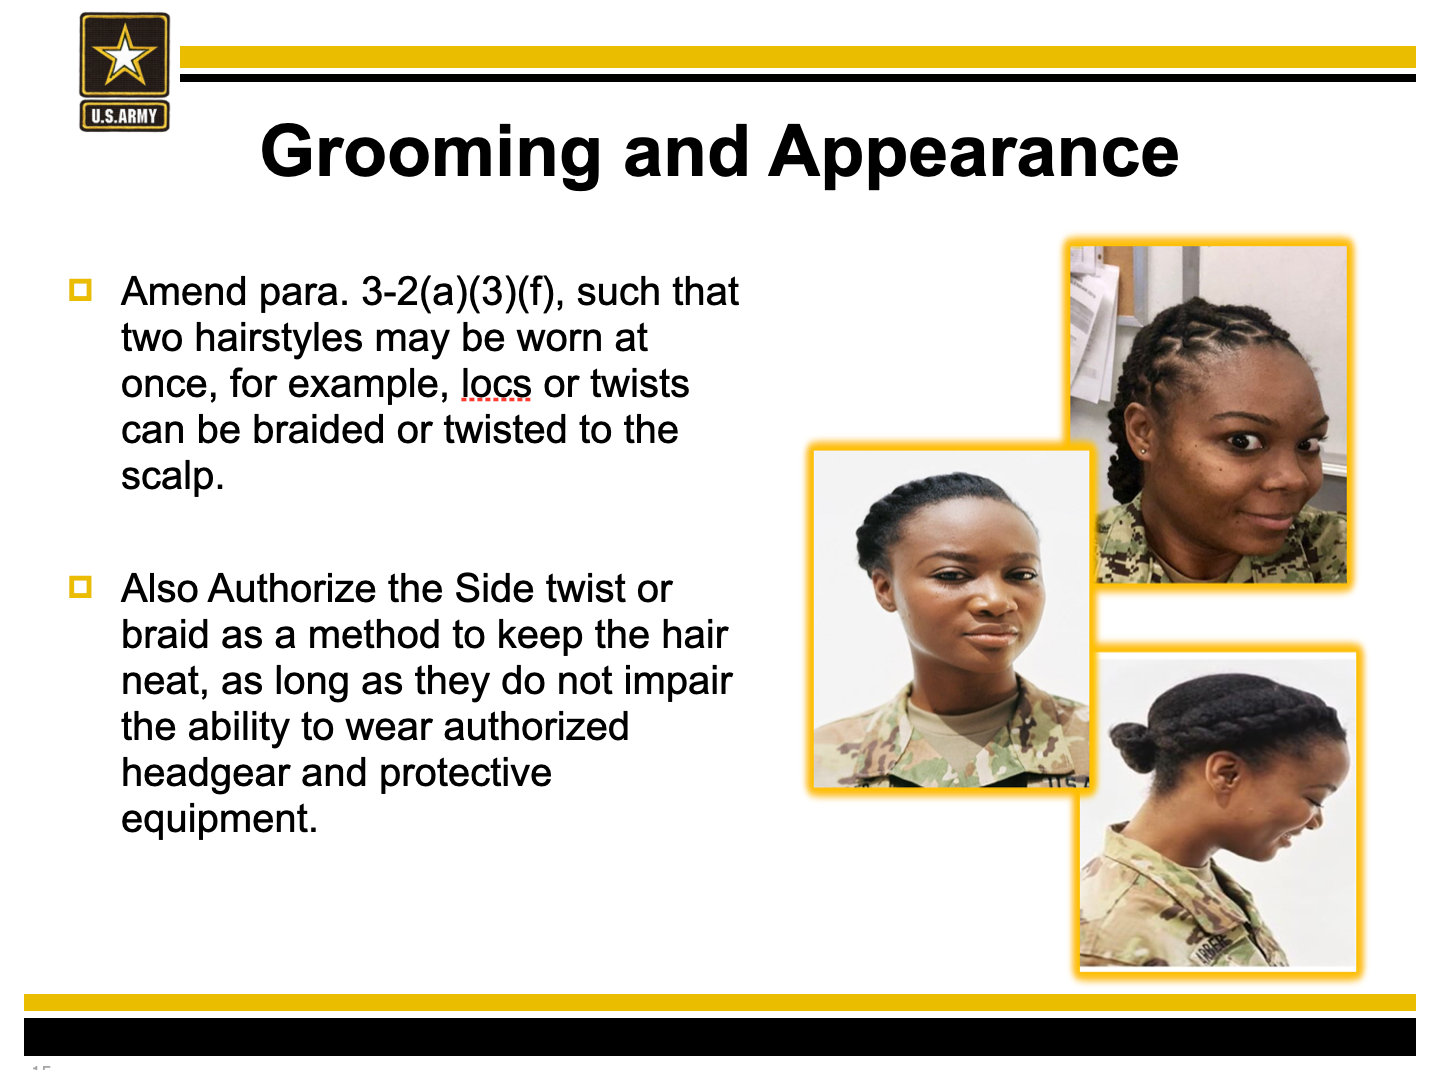 AR 6701 Army Leaders to Announce Hair Regulation Changes in 2021